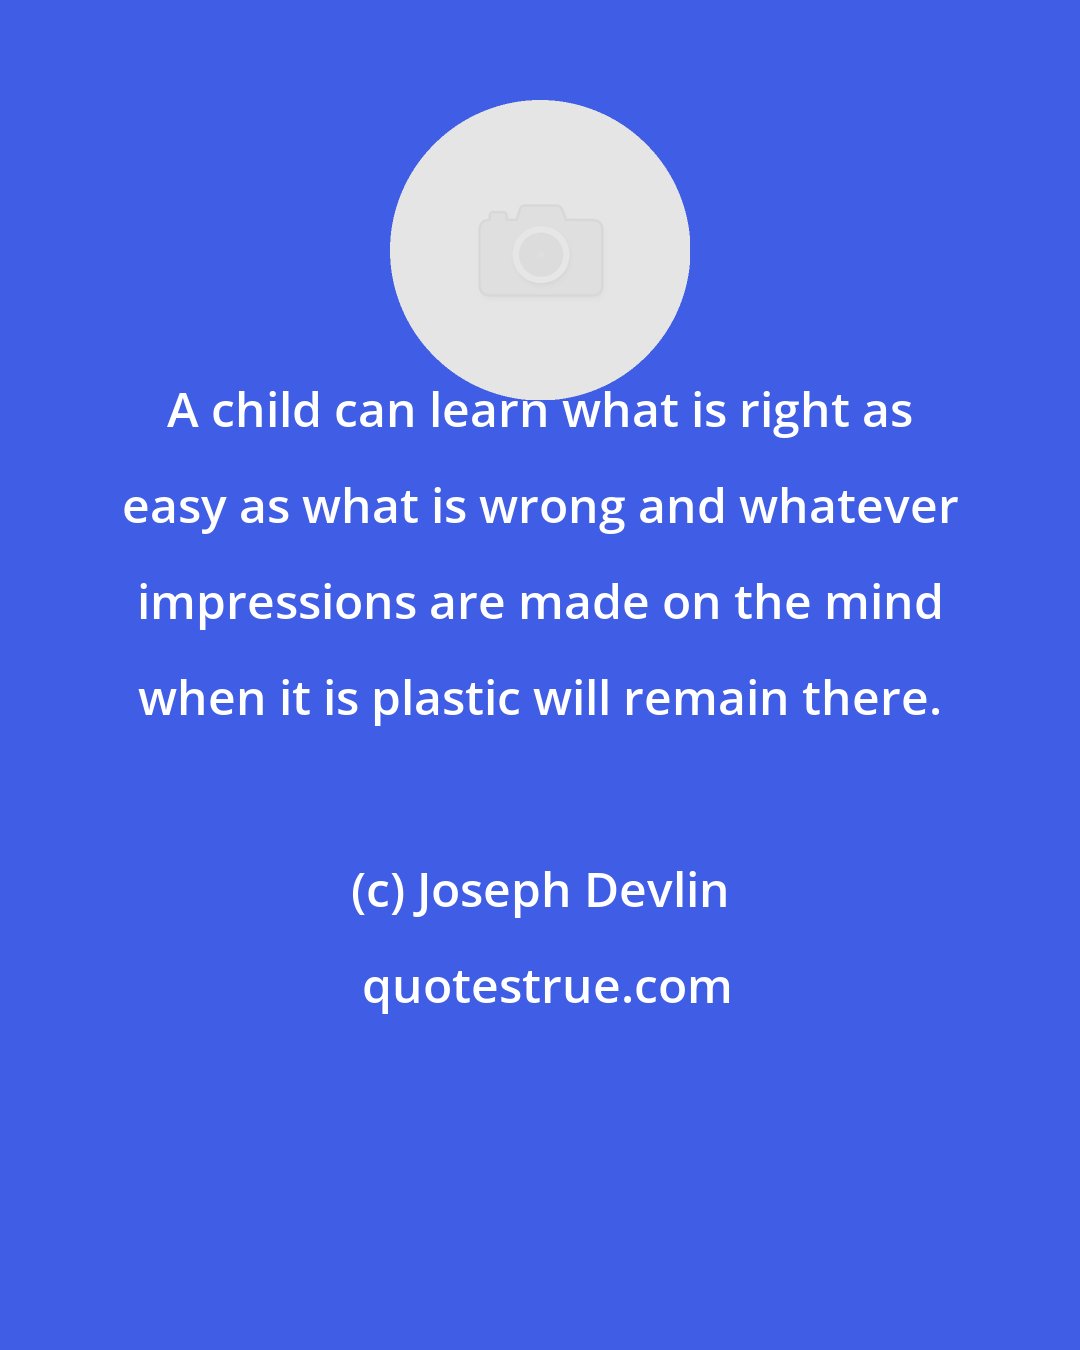 Joseph Devlin: A child can learn what is right as easy as what is wrong and whatever impressions are made on the mind when it is plastic will remain there.